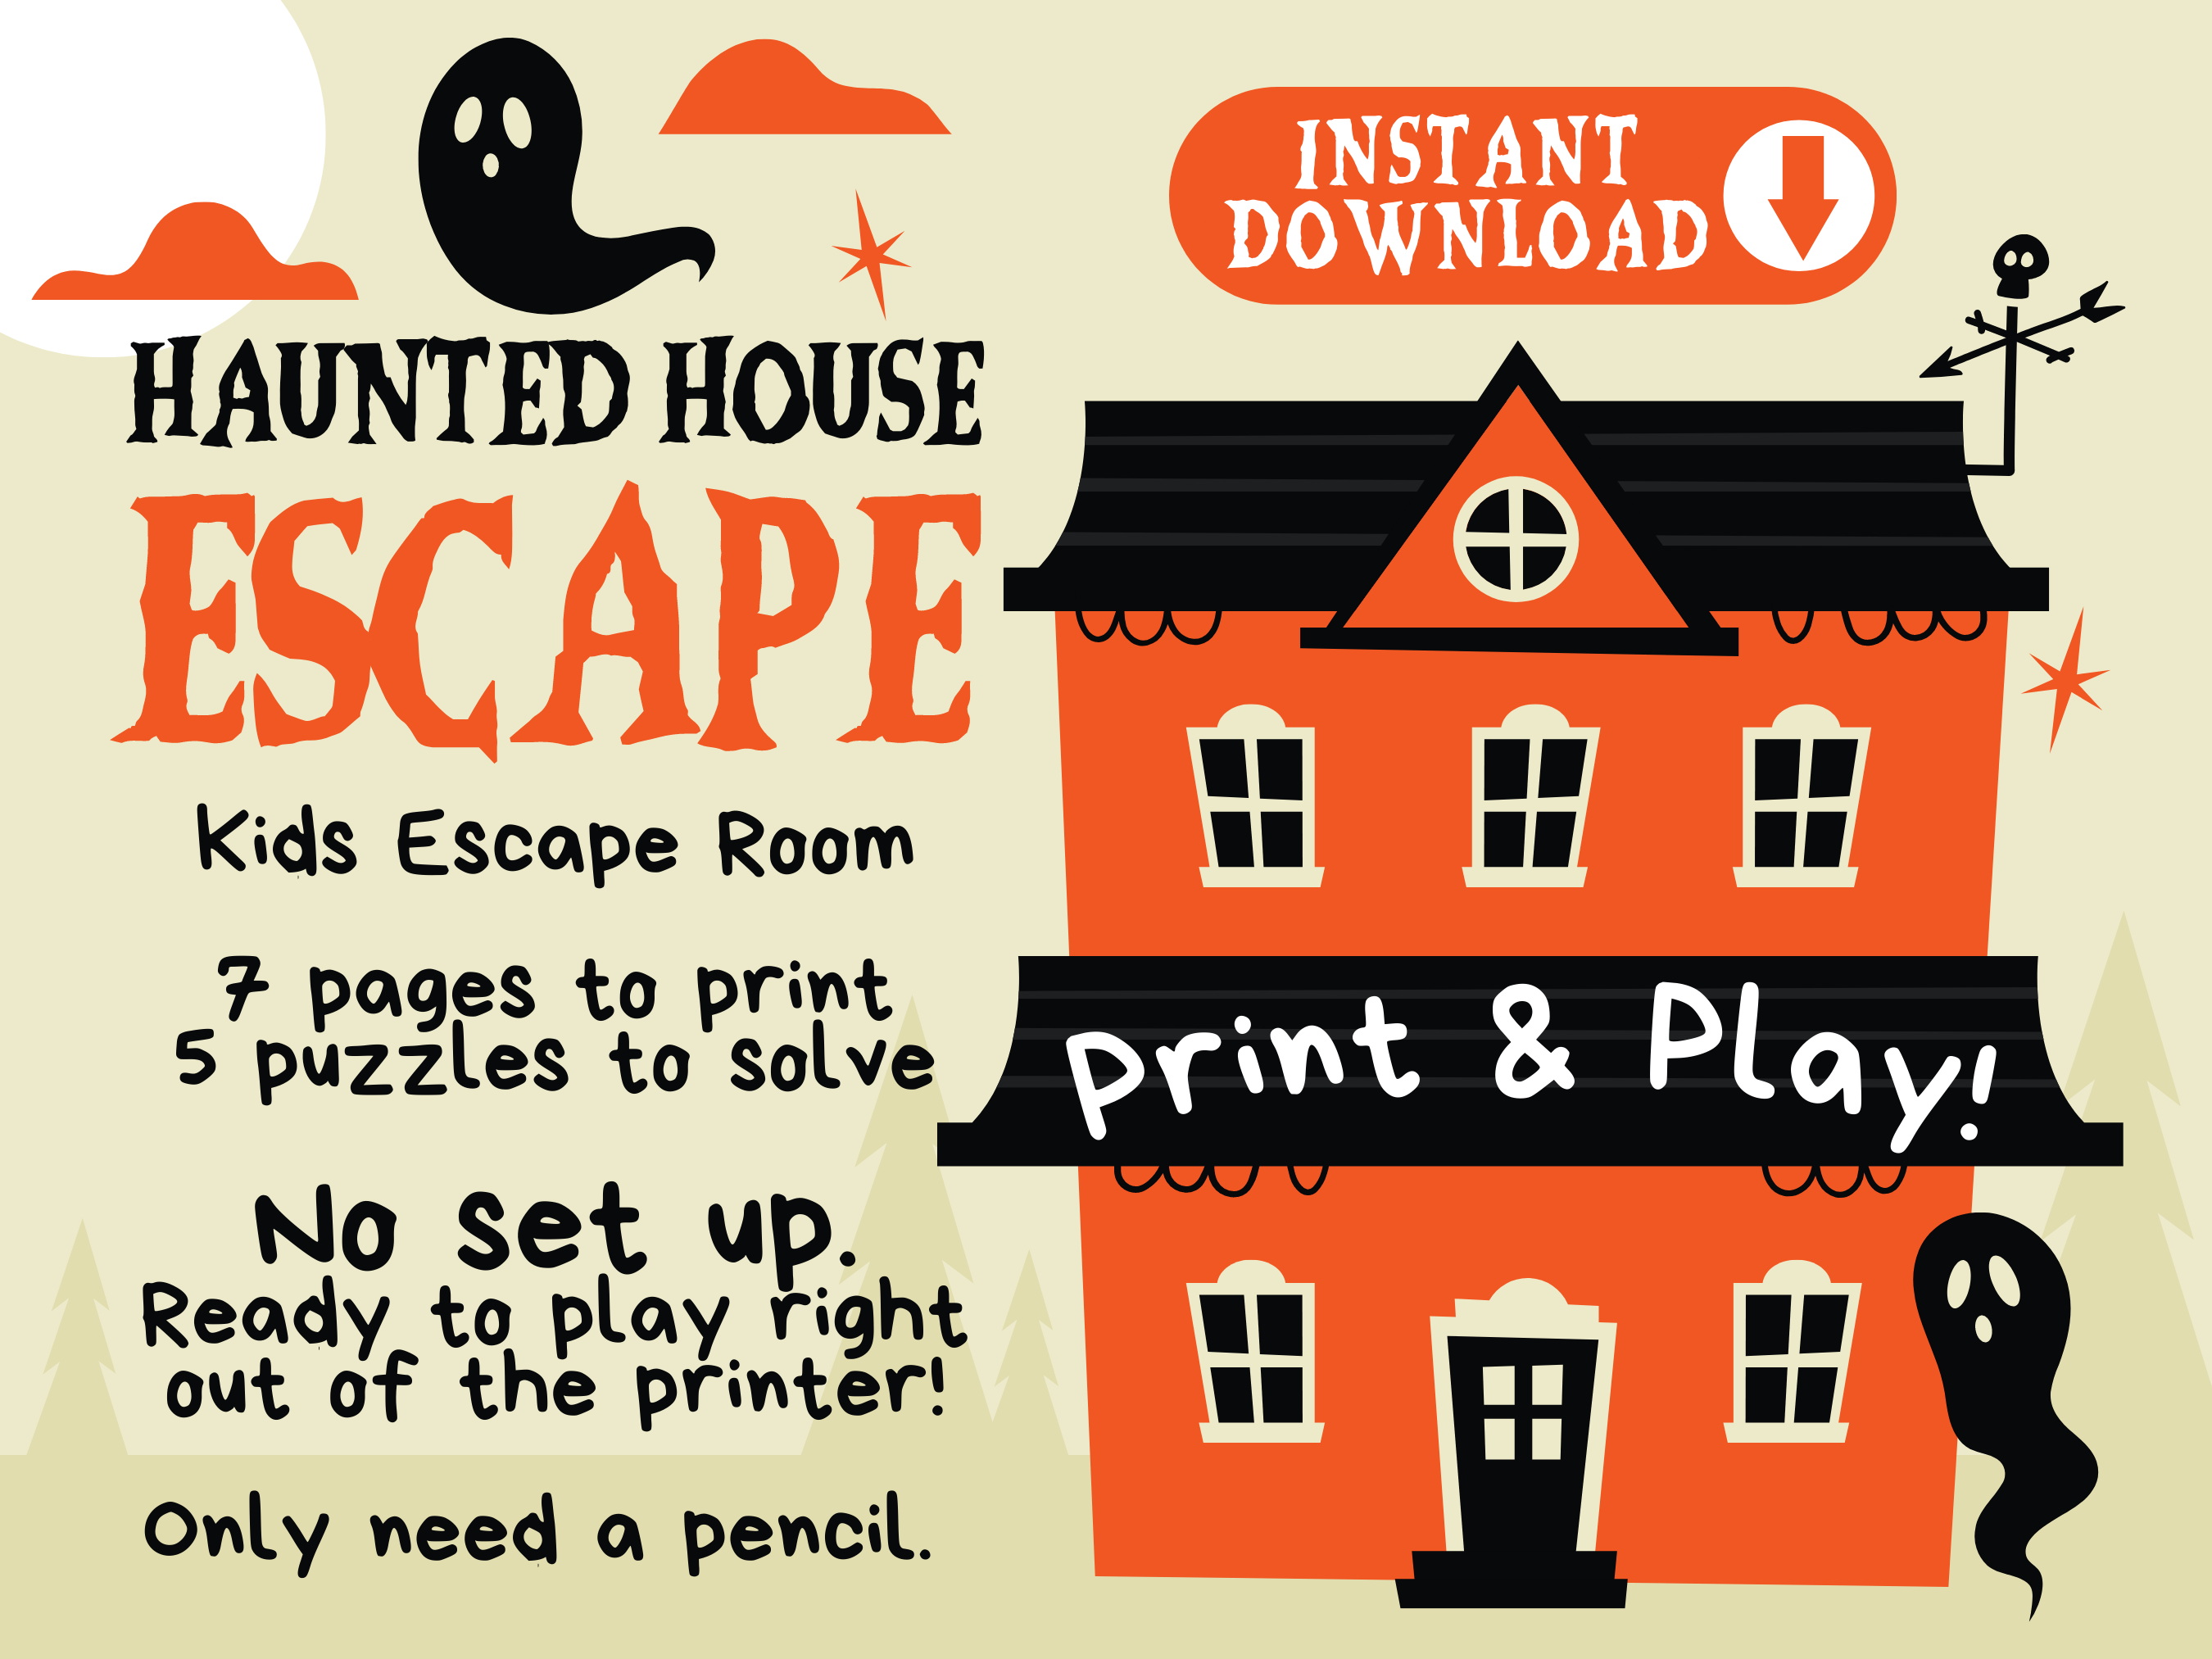 Play at home escape room games I For Children and Adults I